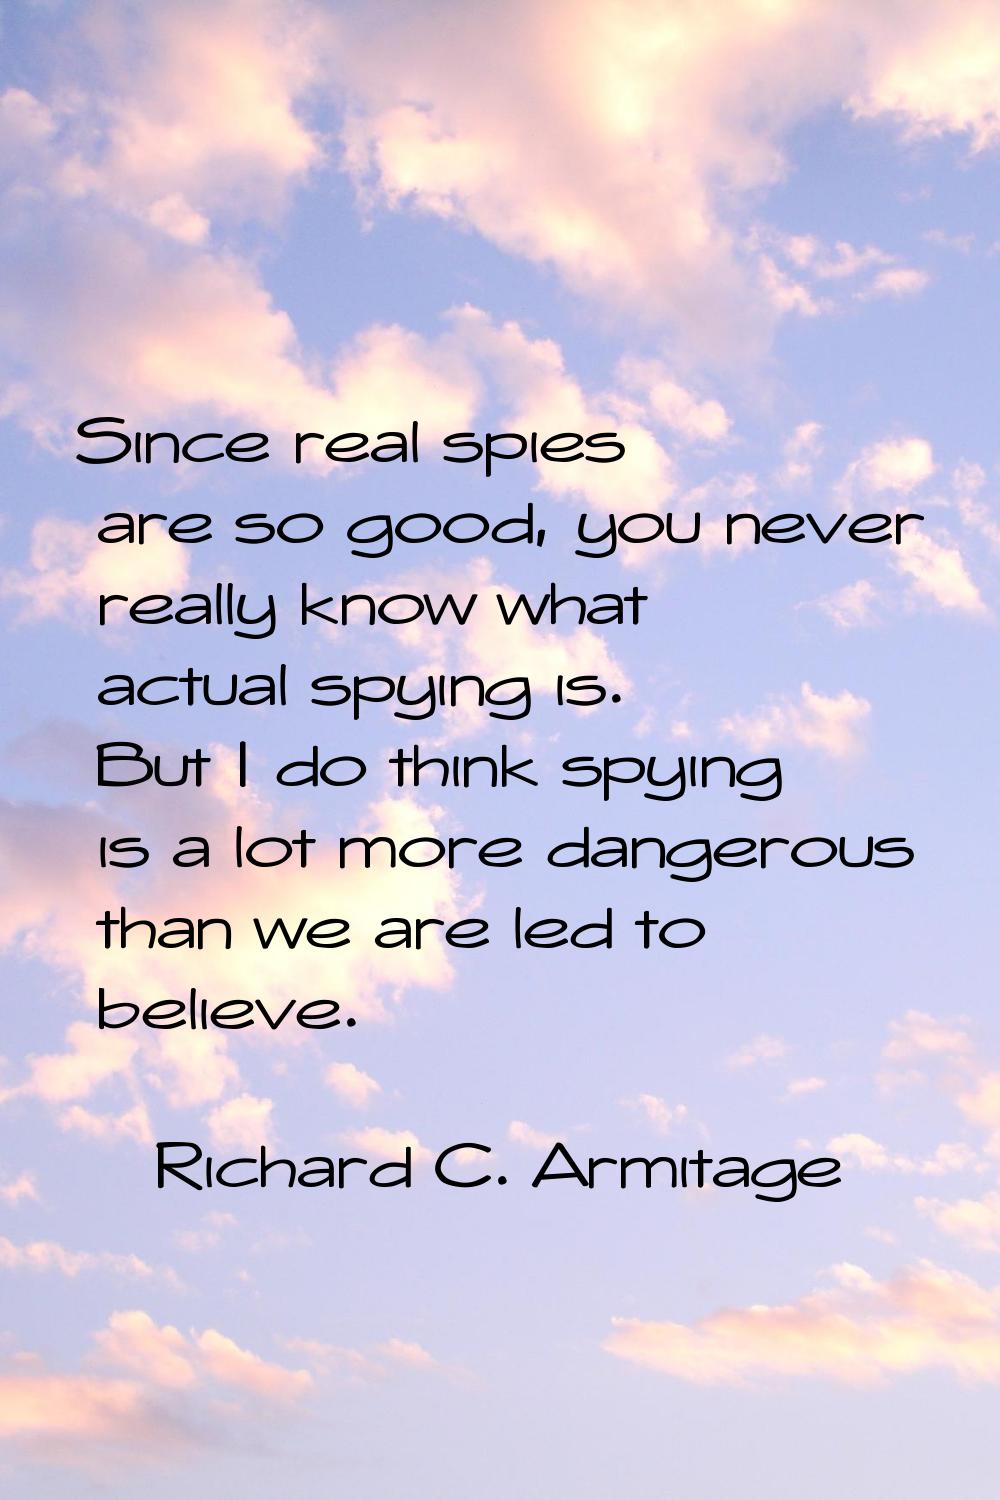 Since real spies are so good, you never really know what actual spying is. But I do think spying is